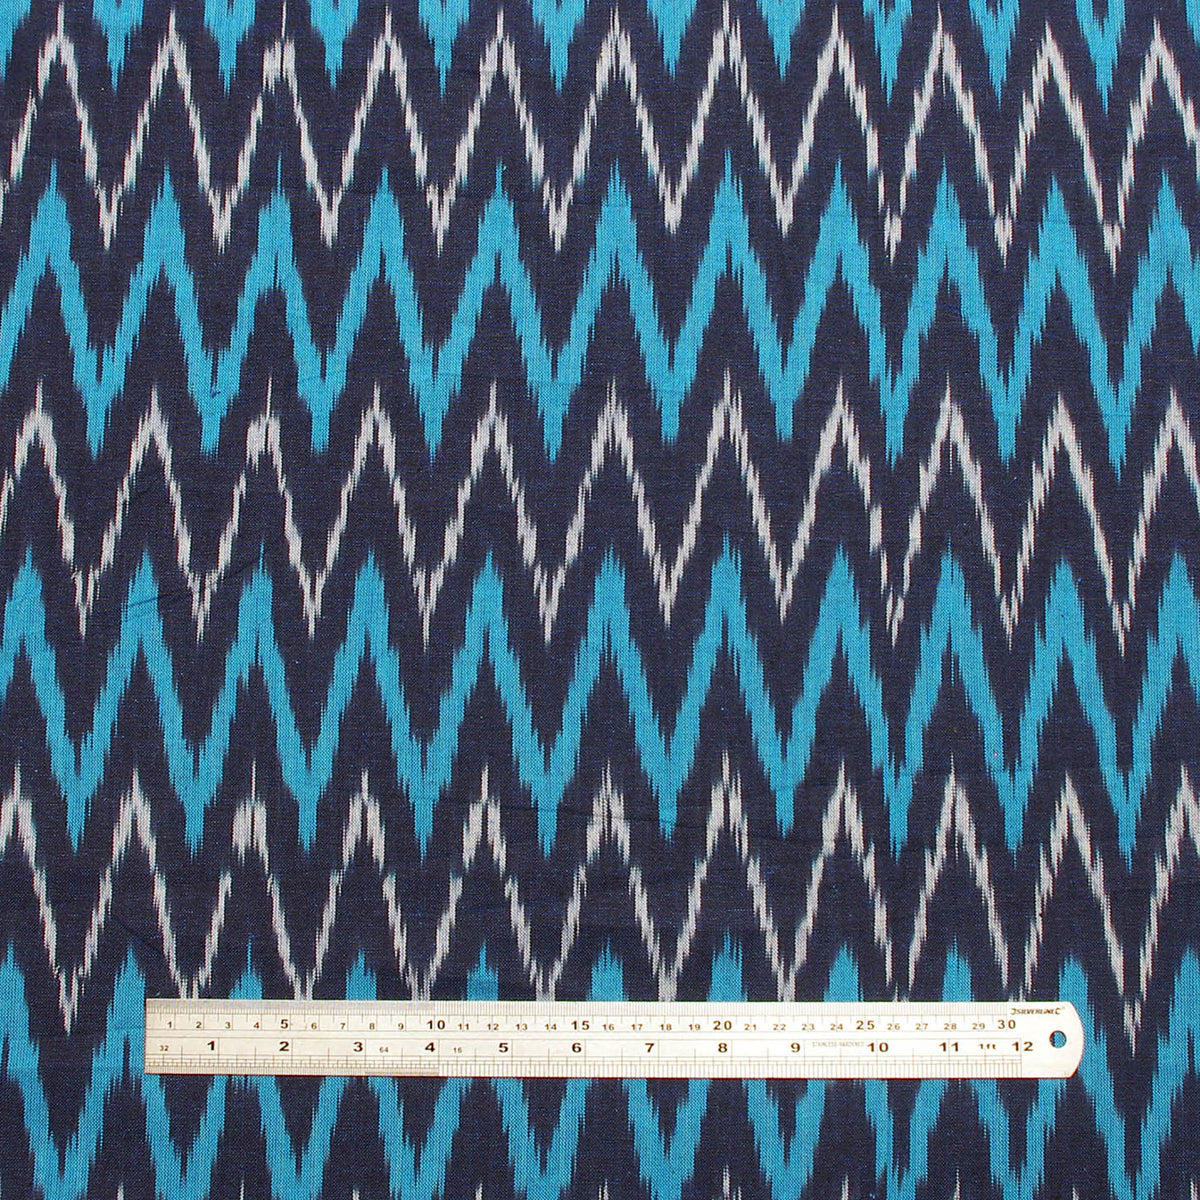 Ikat Hand Woven Cotton Fabric Design - Navy Blue With Zig Zag Weaves